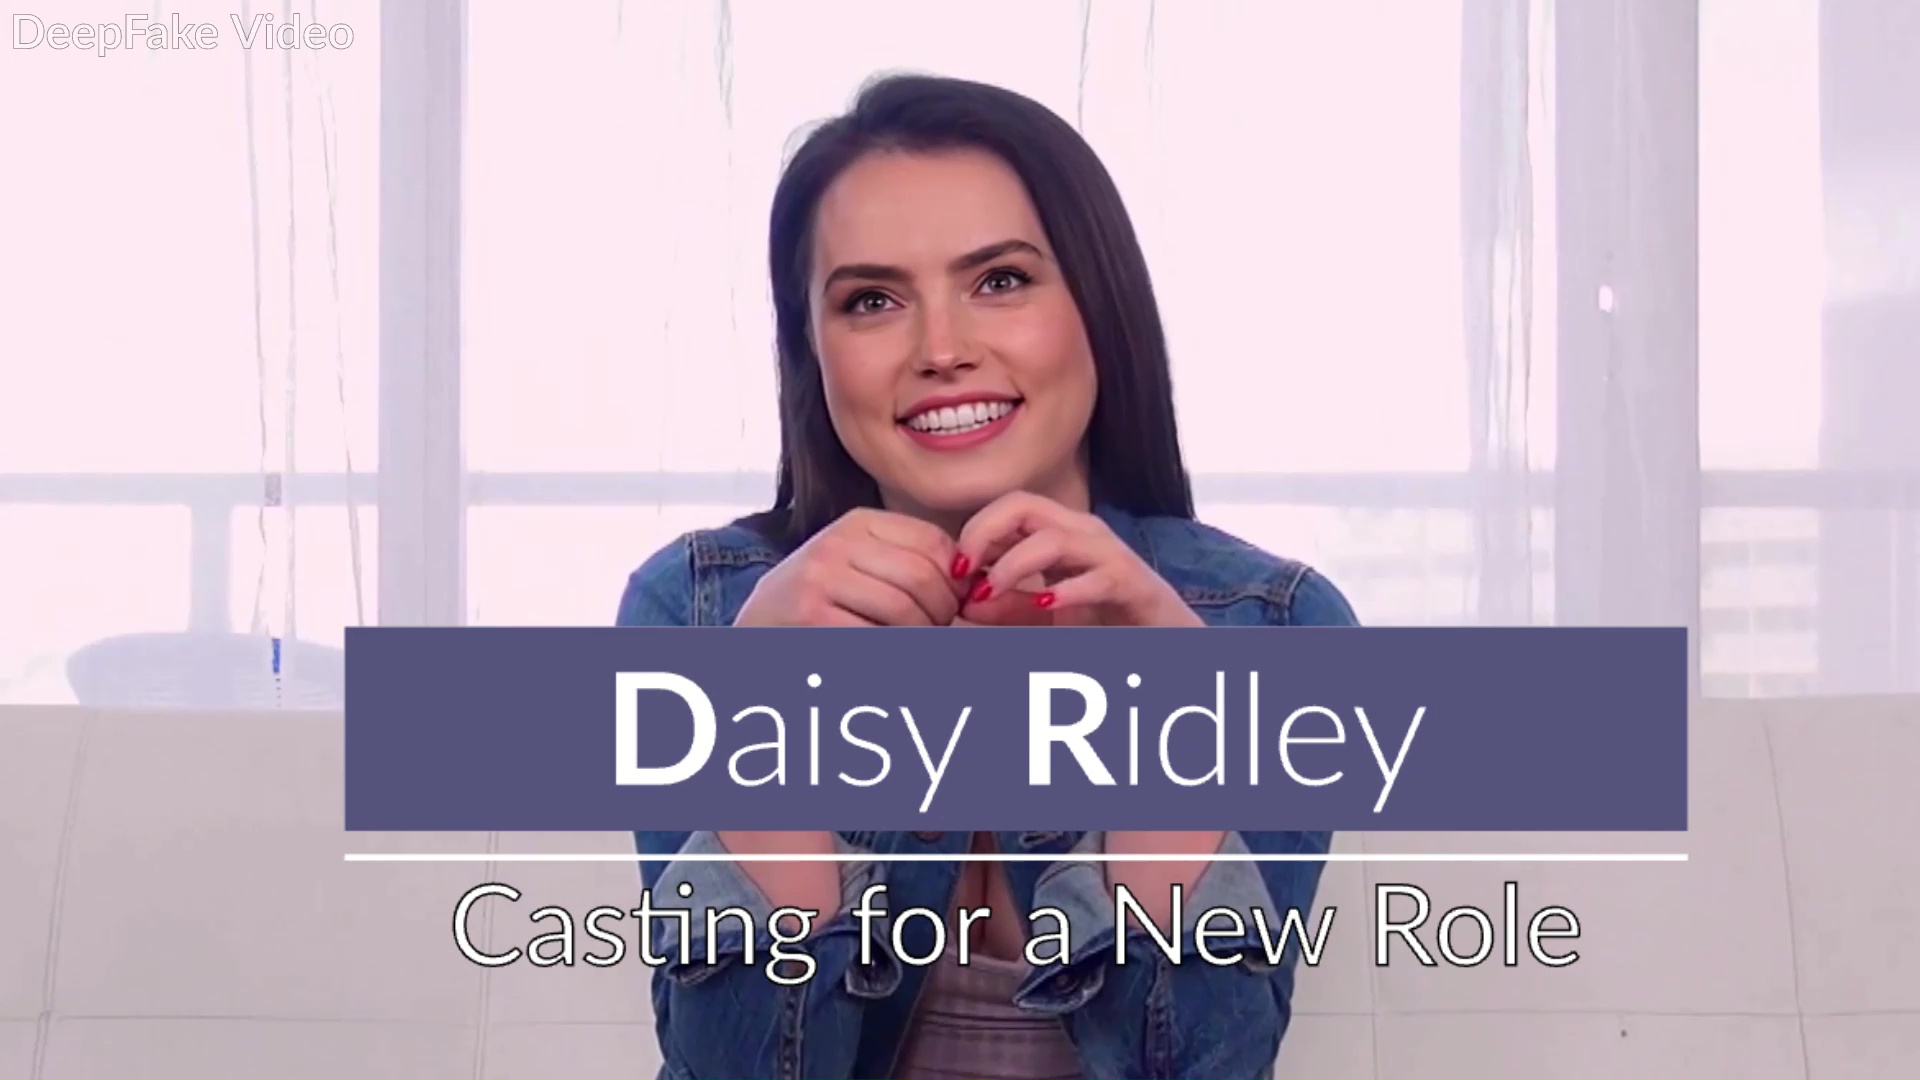 Daisy Ridley - Casting for a New Role - Full Video